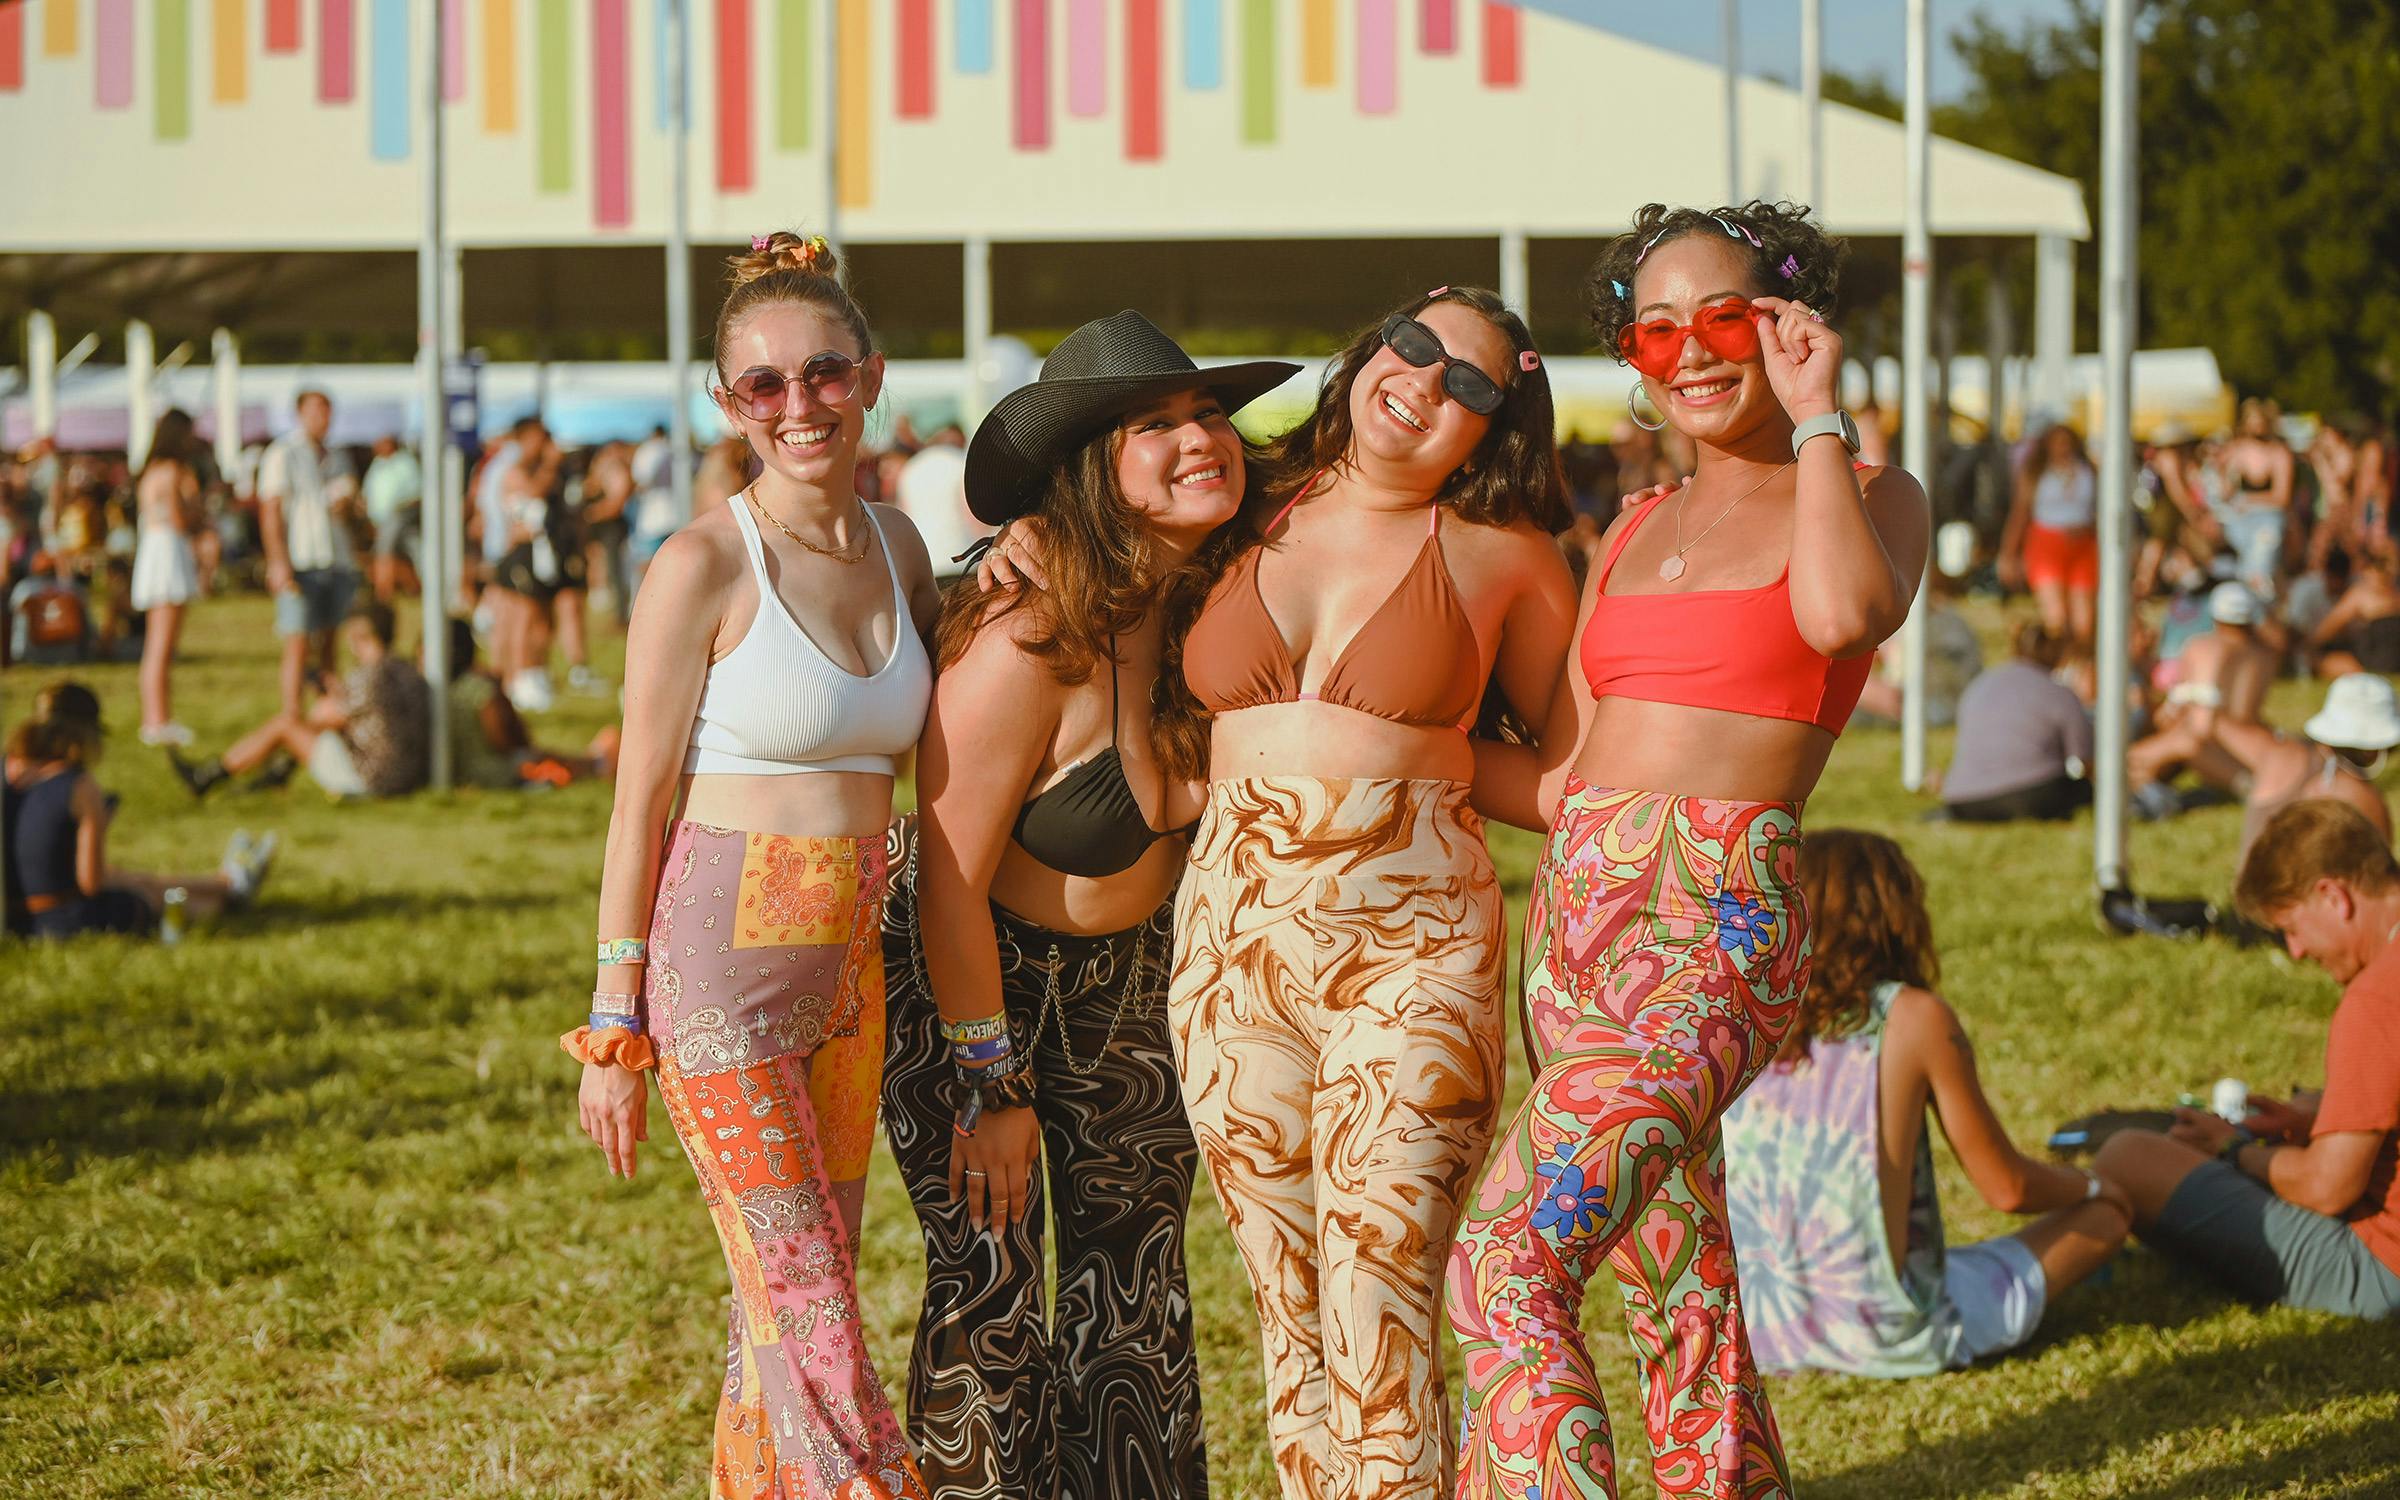 10 Music Festival Outfits to Copy - Inspired By This  Festival outfits  rave, Festival outfit inspiration, Music festival outfits